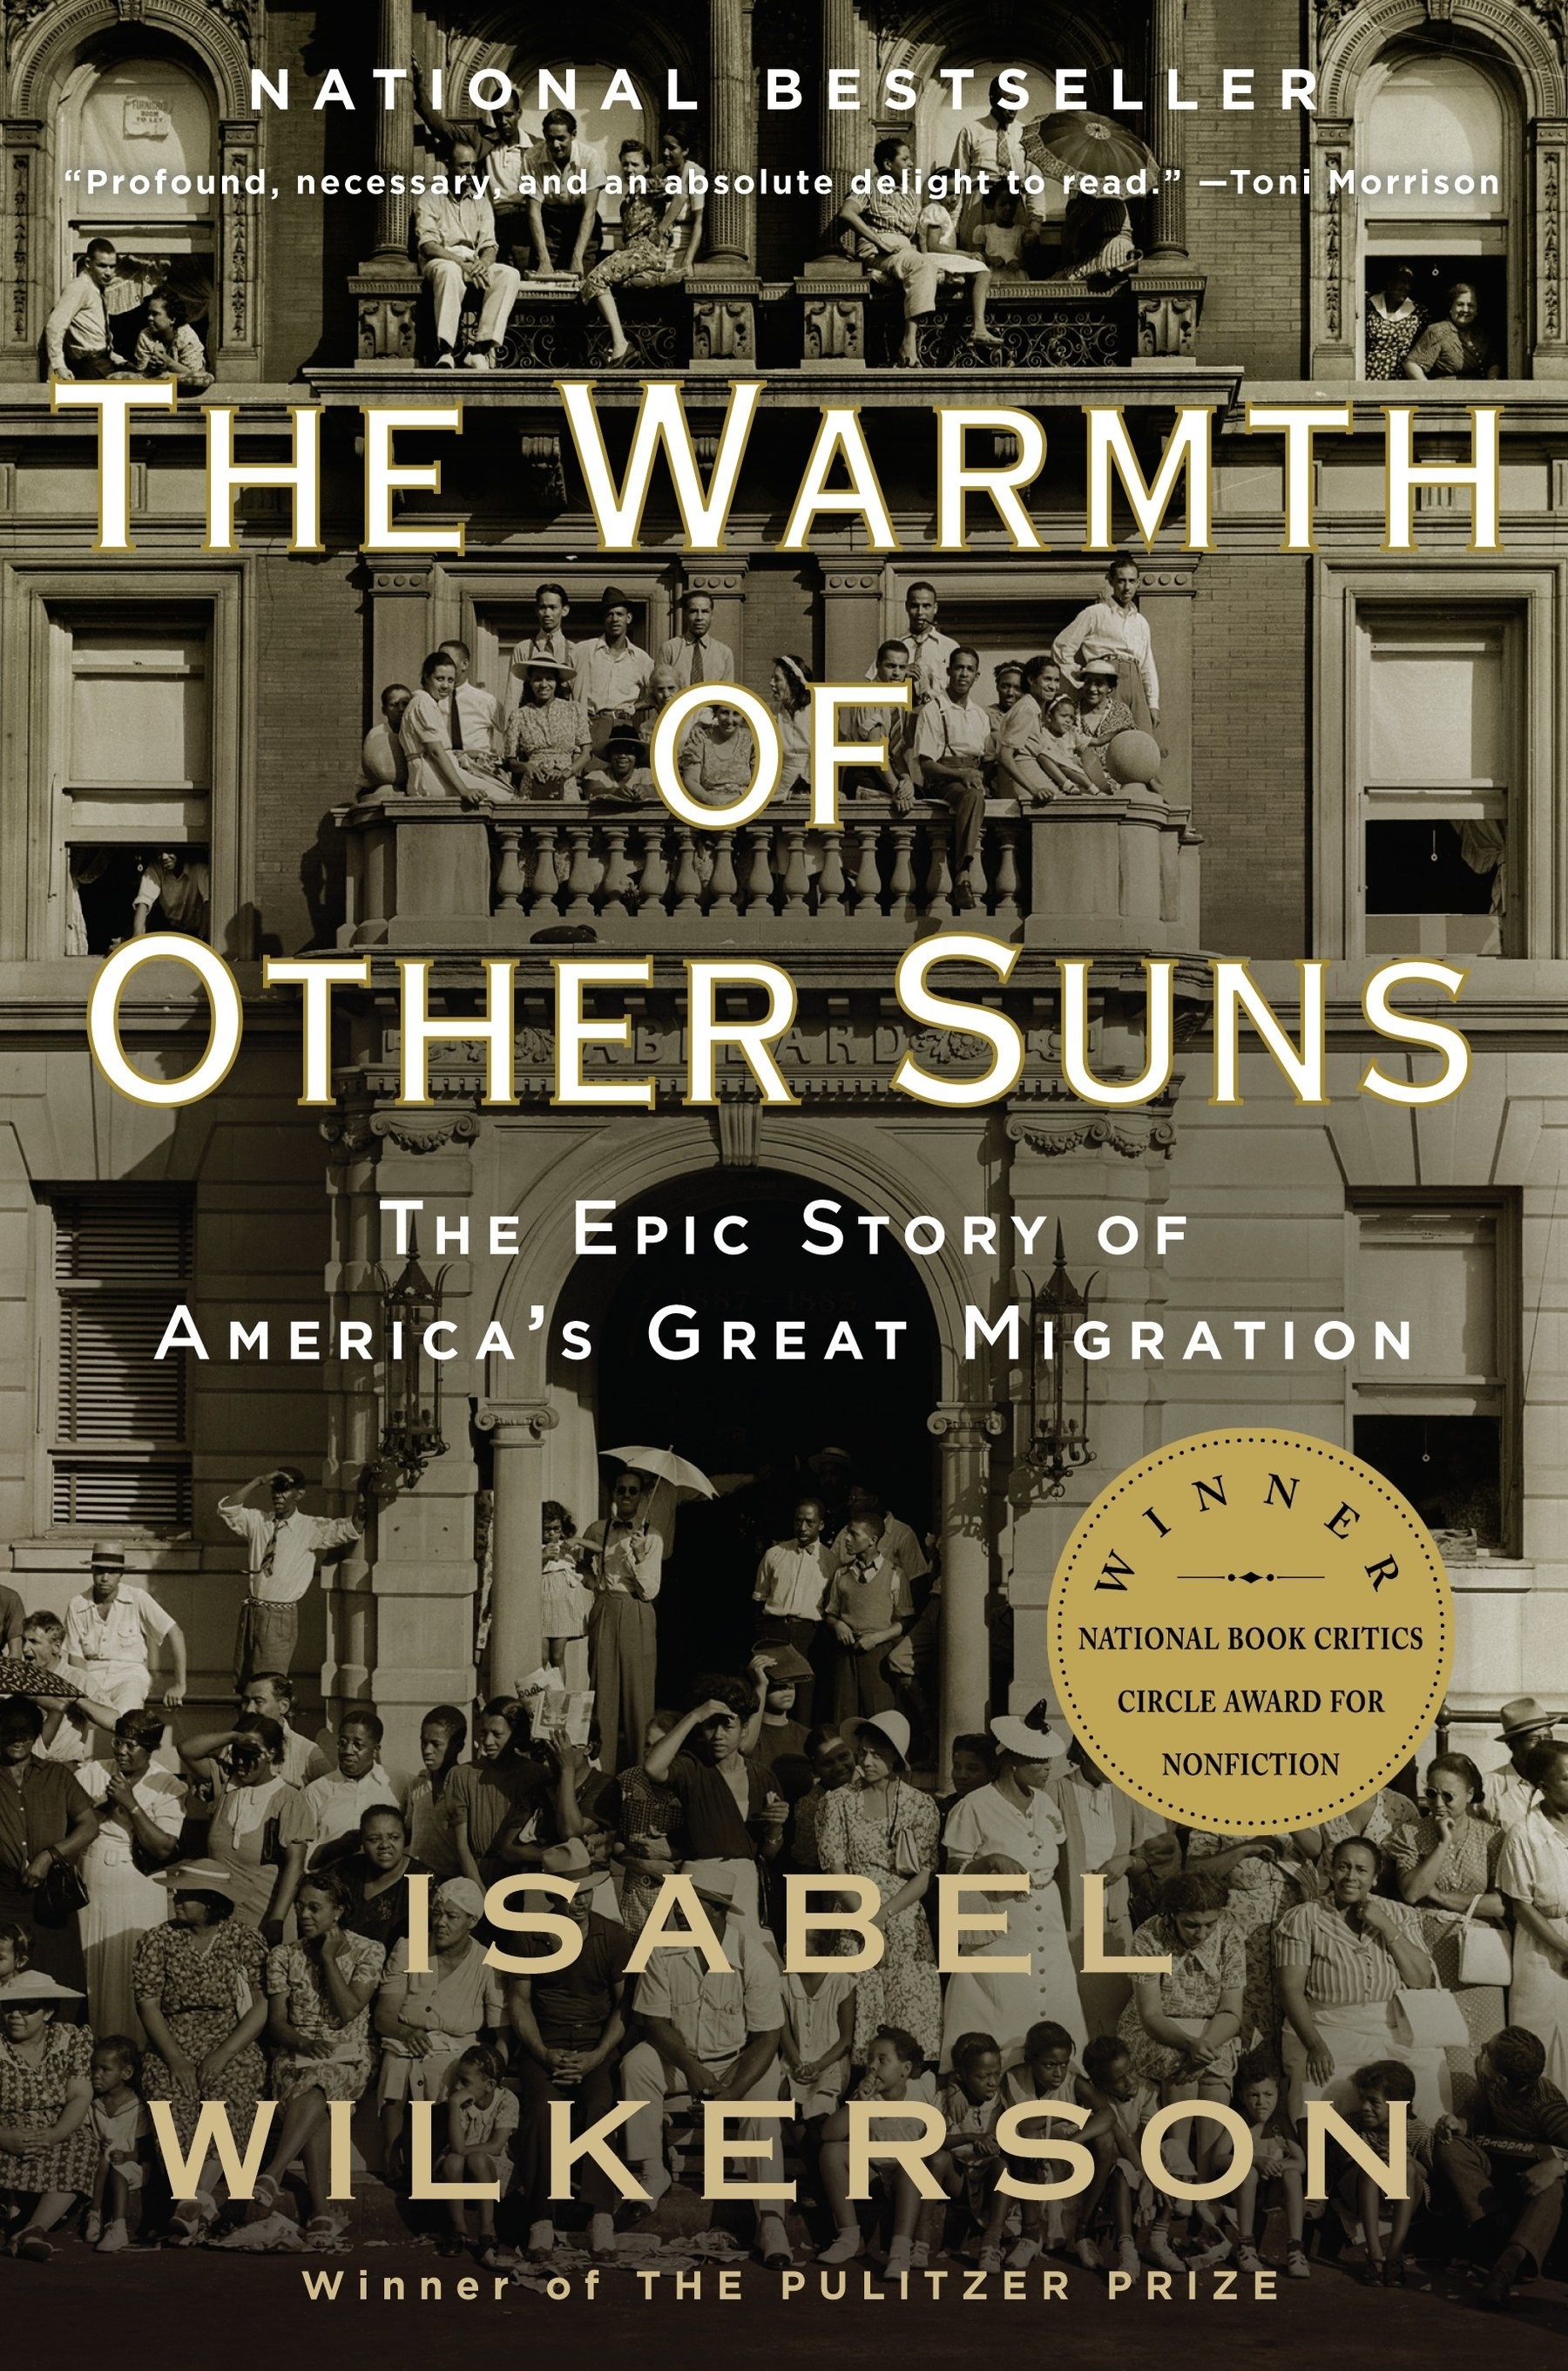 &quot;The Warmth of Other Suns&quot; by Isabel Wilkerson